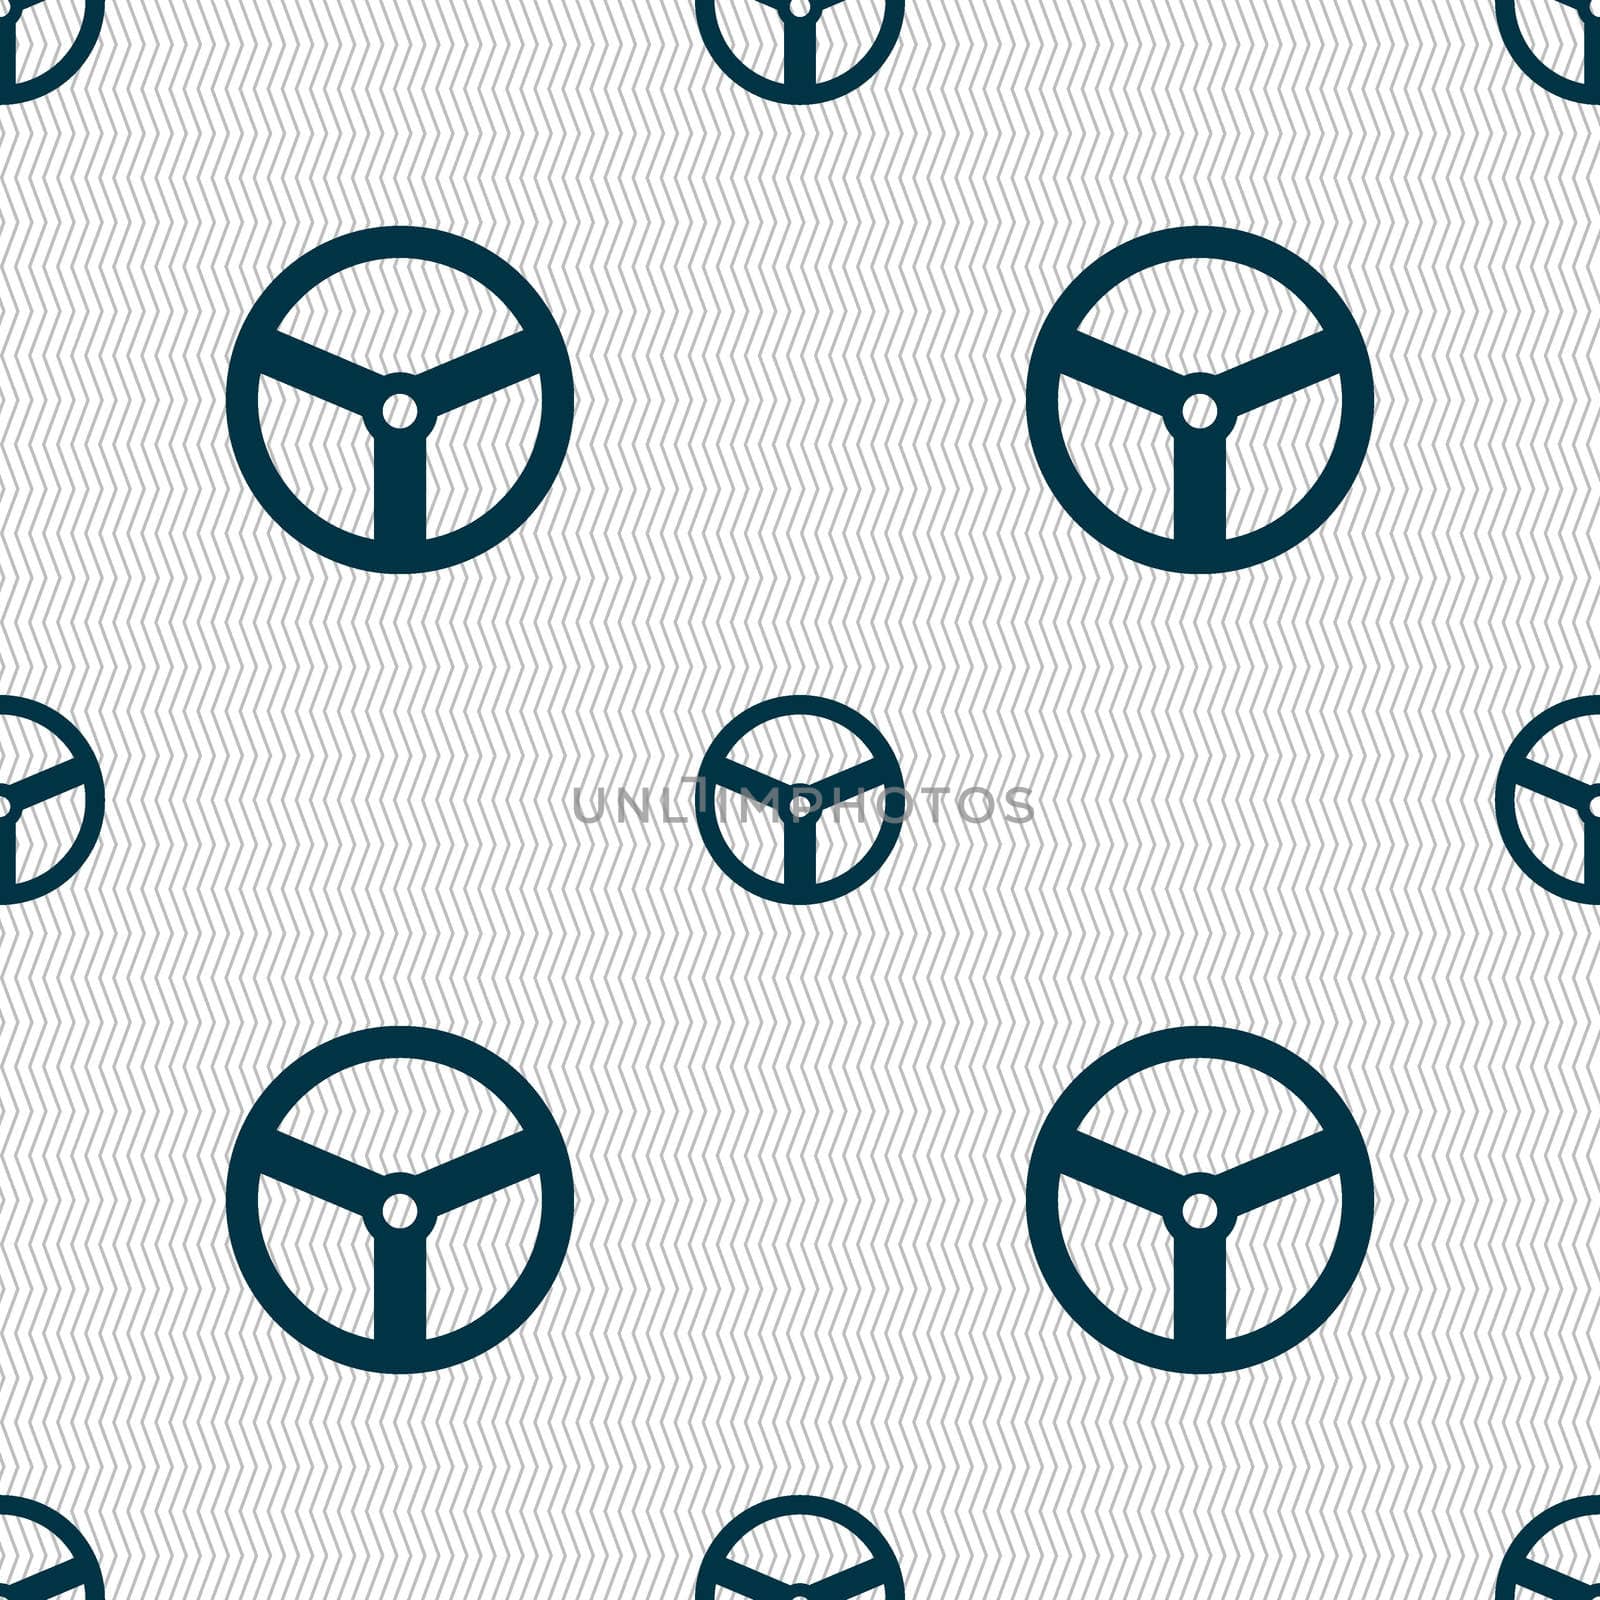 Steering wheel icon sign. Seamless abstract background with geometric shapes. illustration